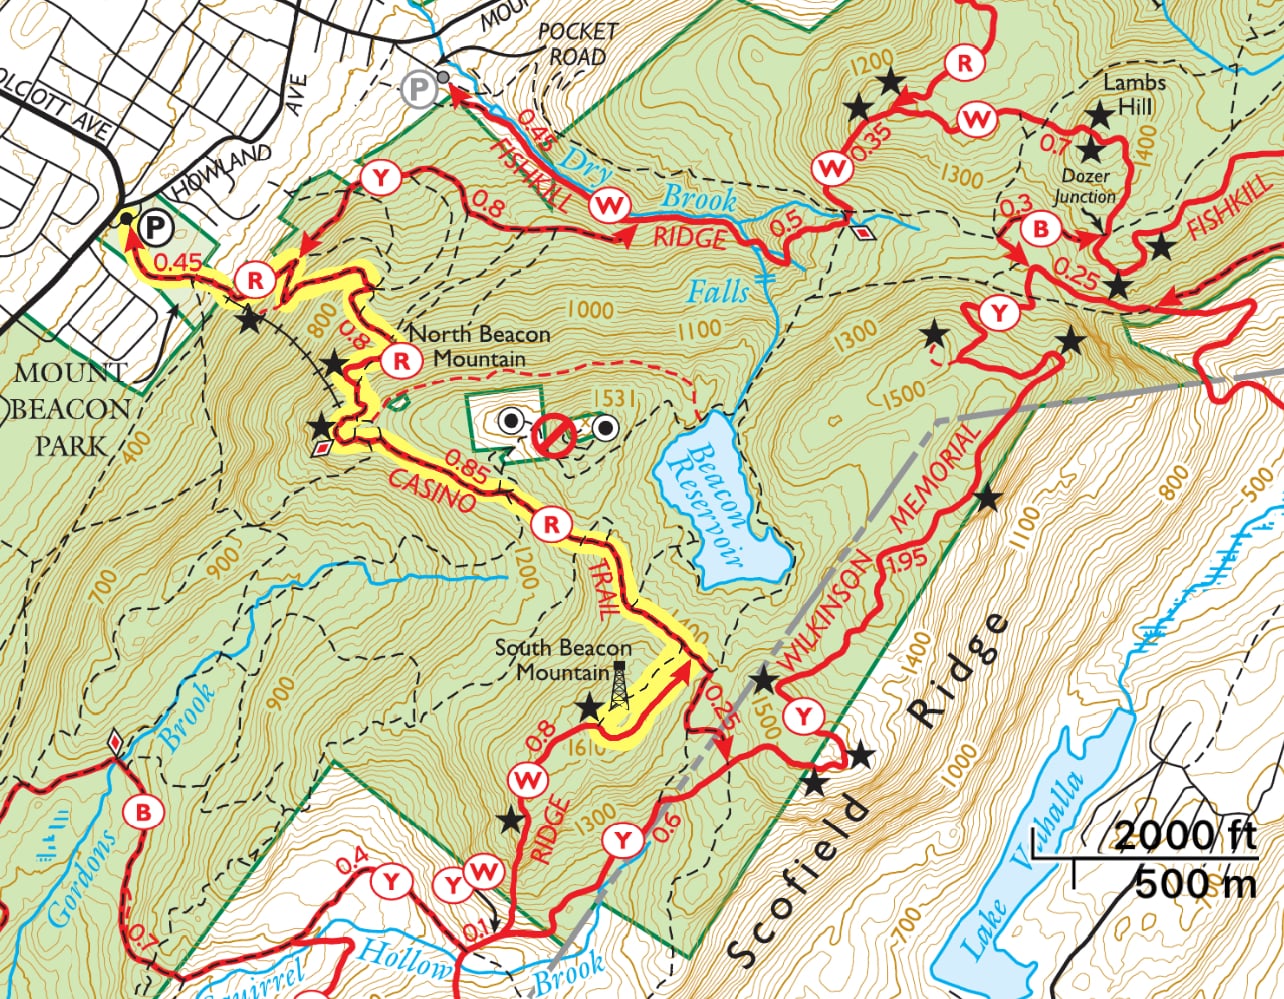 Beacon Fire Tower trail map